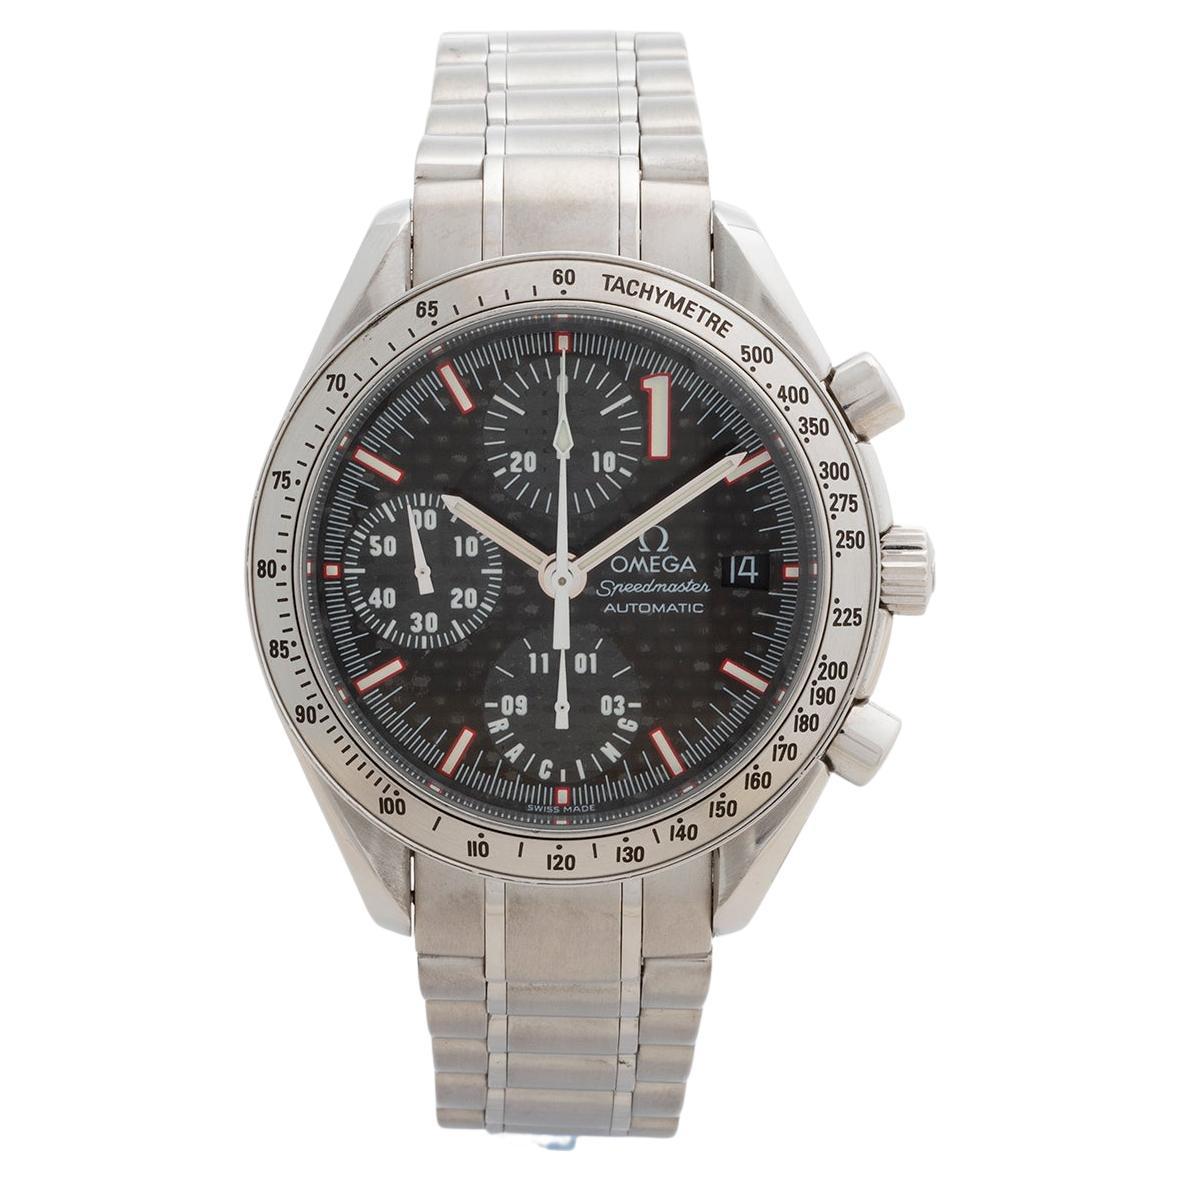 Is the Omega Speedmaster Reduced discontinued?